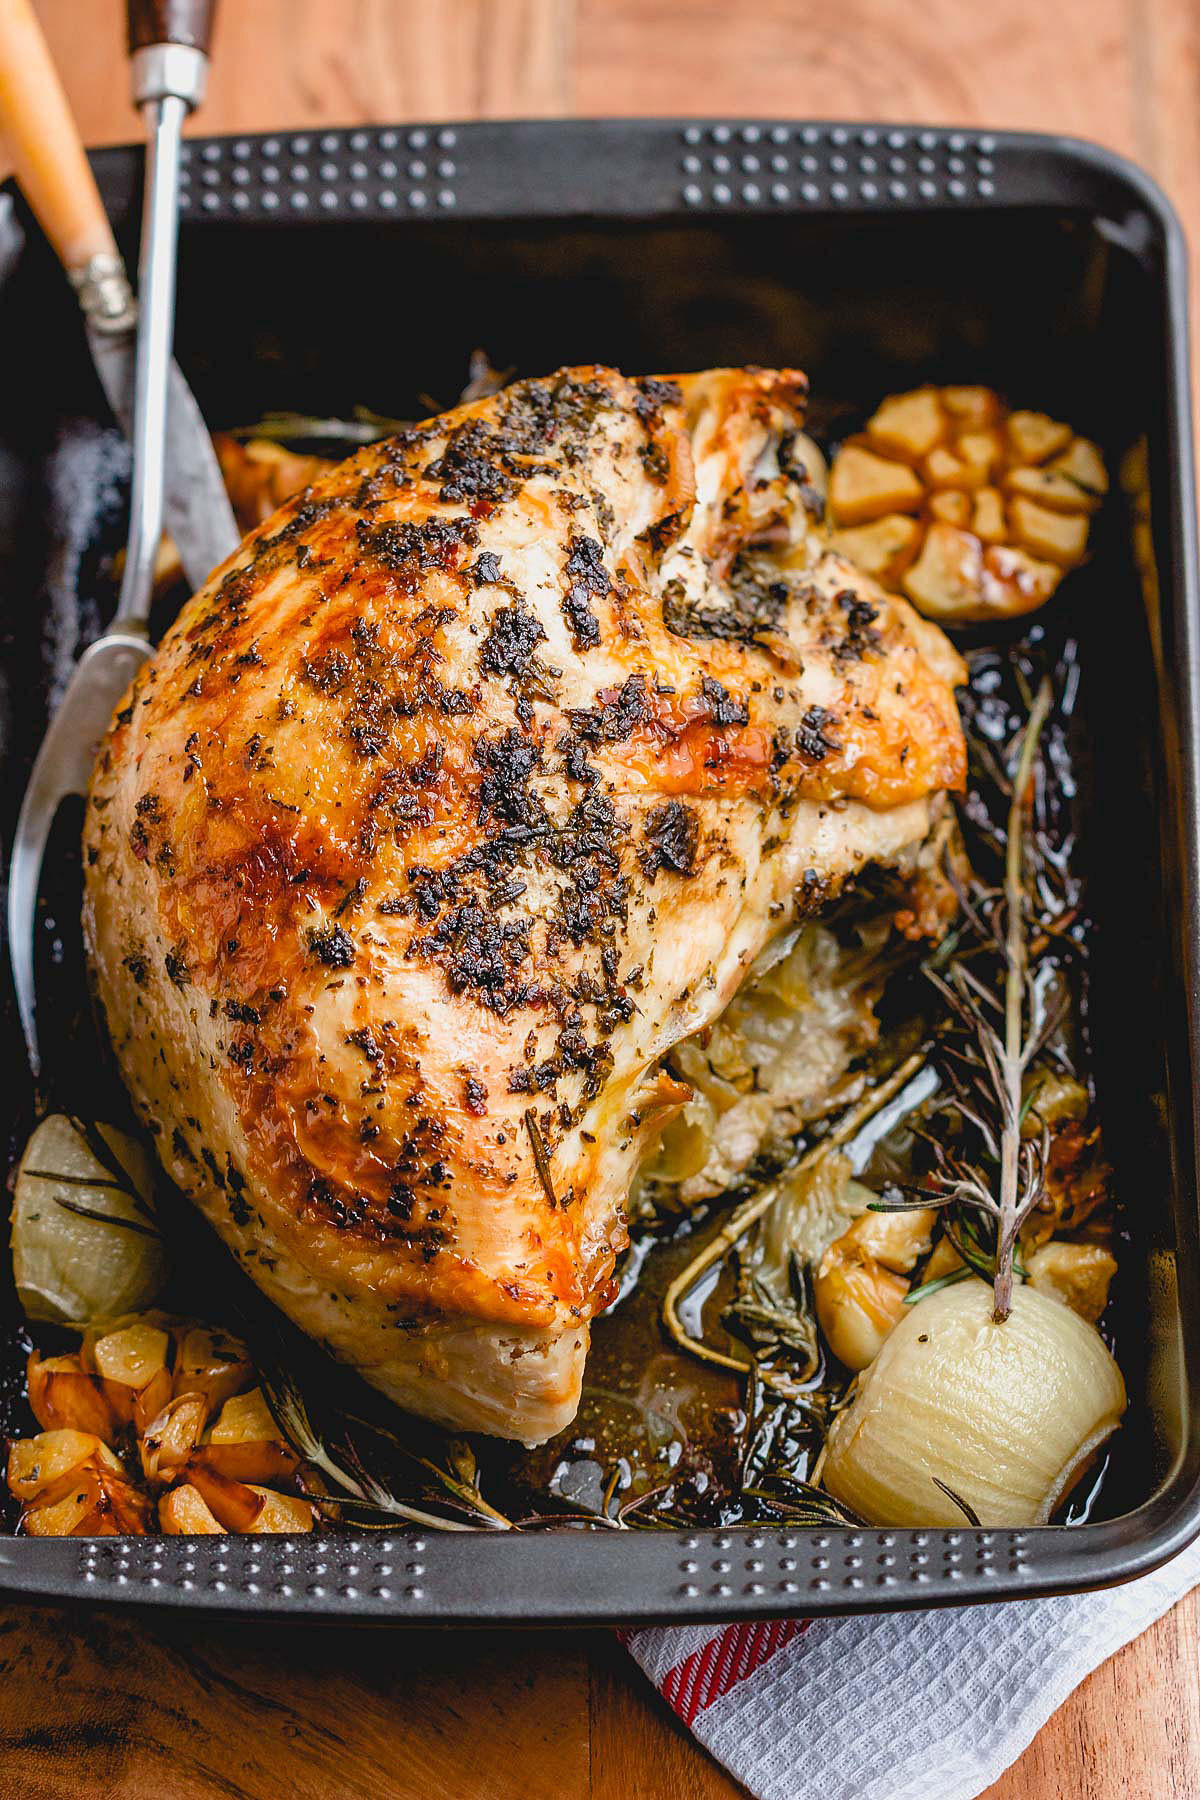 Recipe For Thanksgiving Turkey
 Roasted Turkey Breast Recipe with Garlic Herb Butter